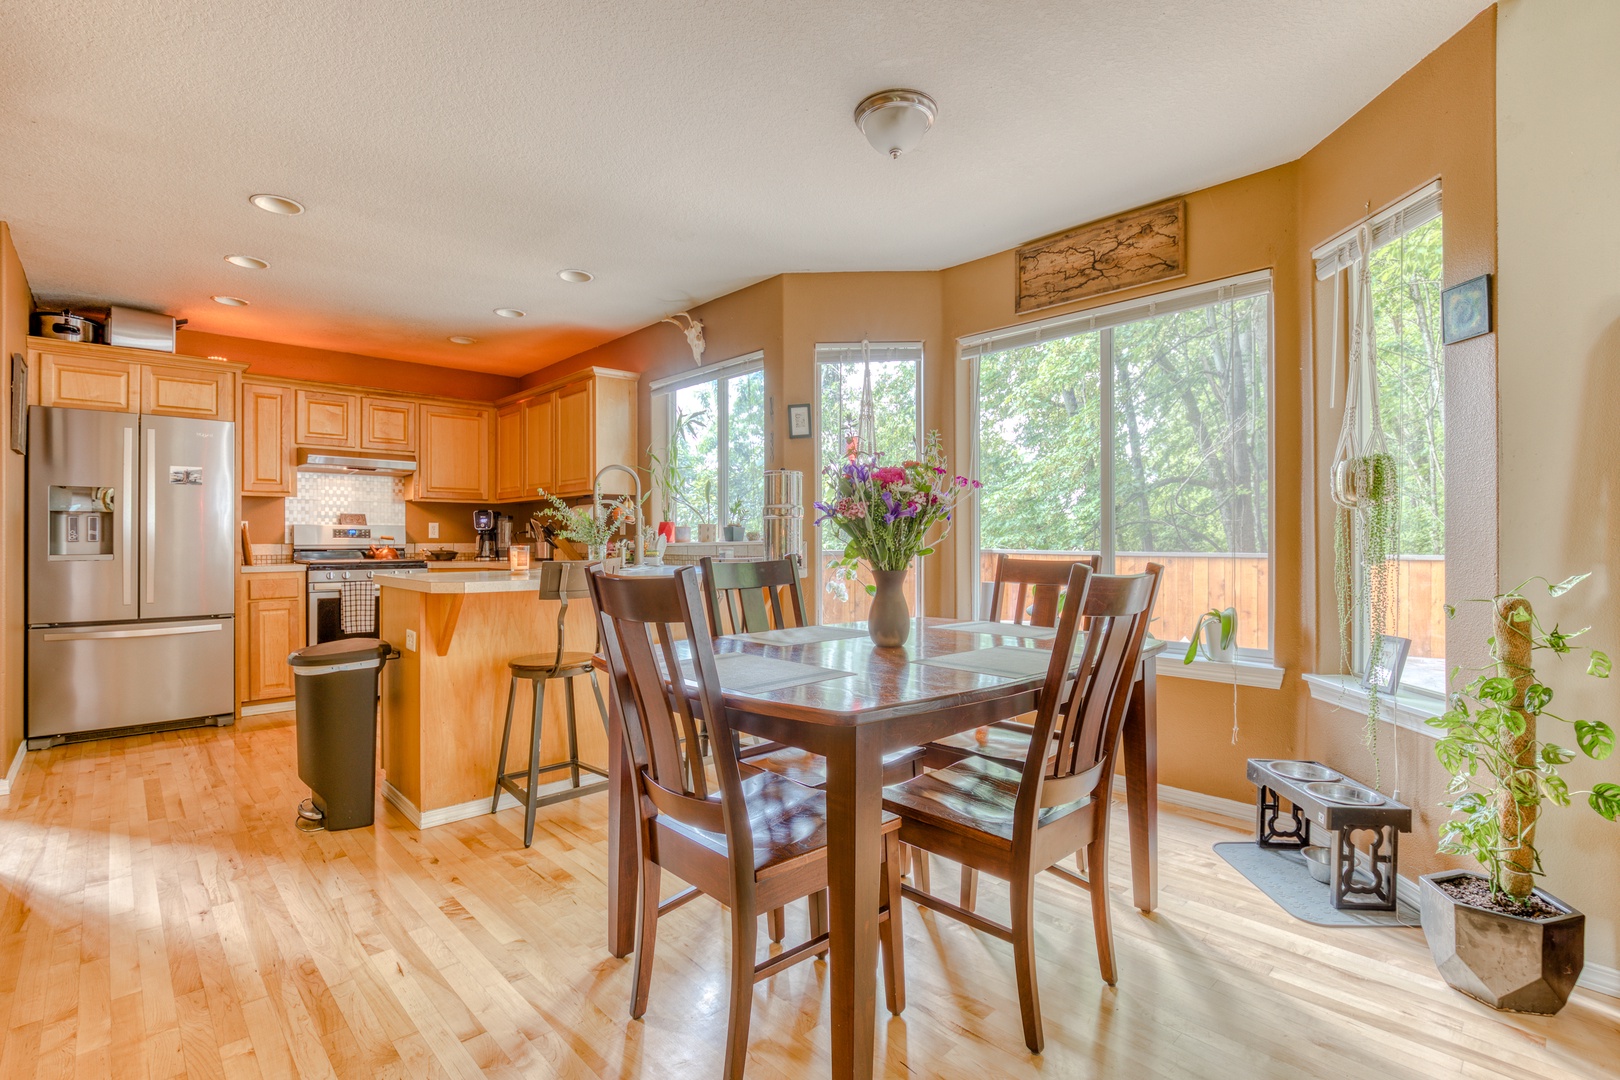 Clackamas Vacation Rentals, Duck Crossing - Easily navigate to the dining table from the kitchen